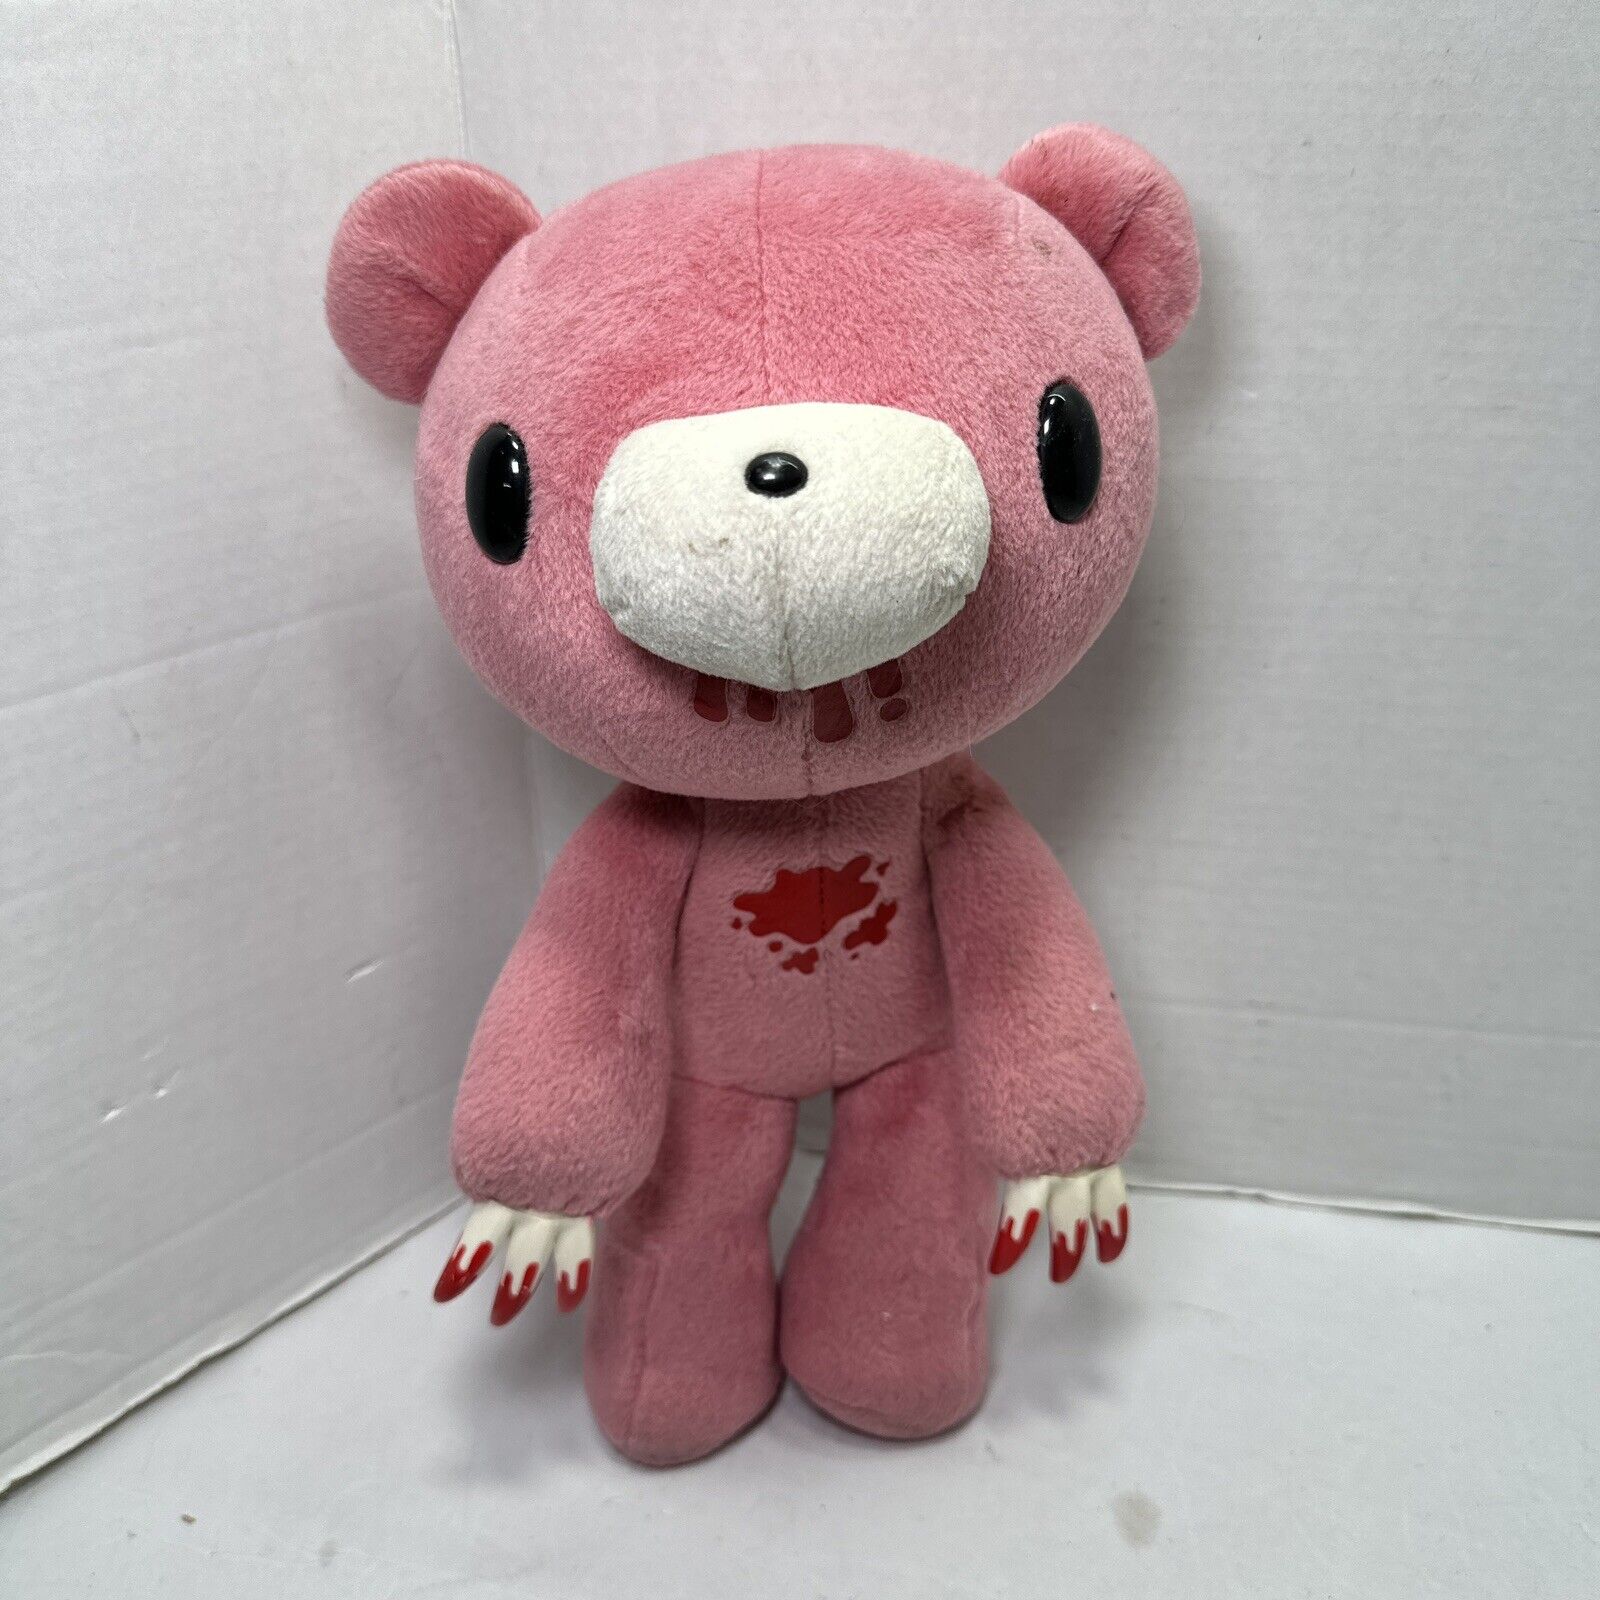 Gloomy Plush – 12” Stand-up Bendable Doll Pink